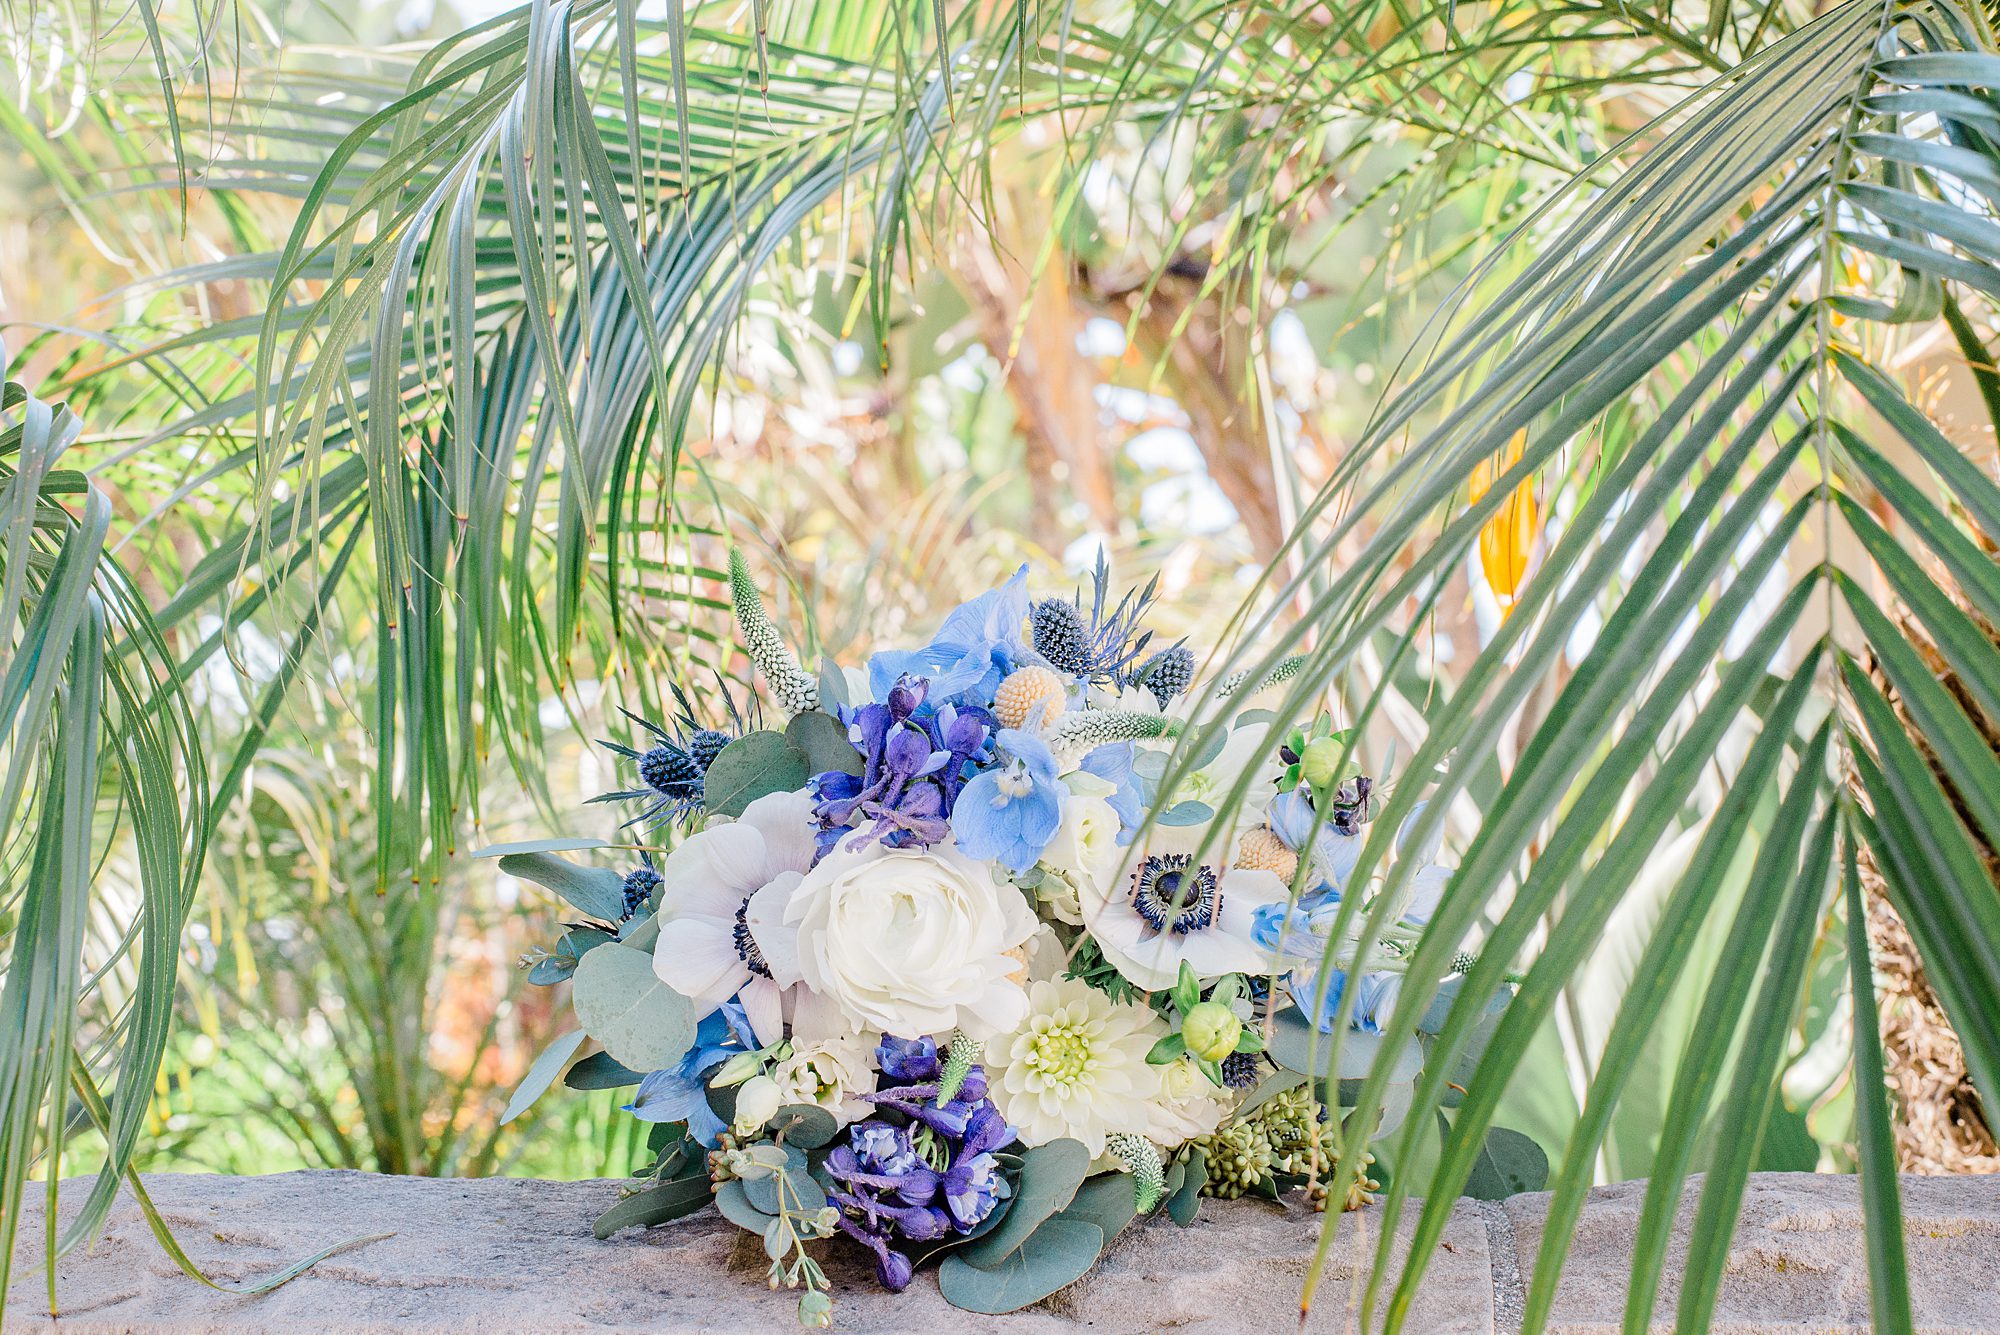 blue and white bridal bouquet